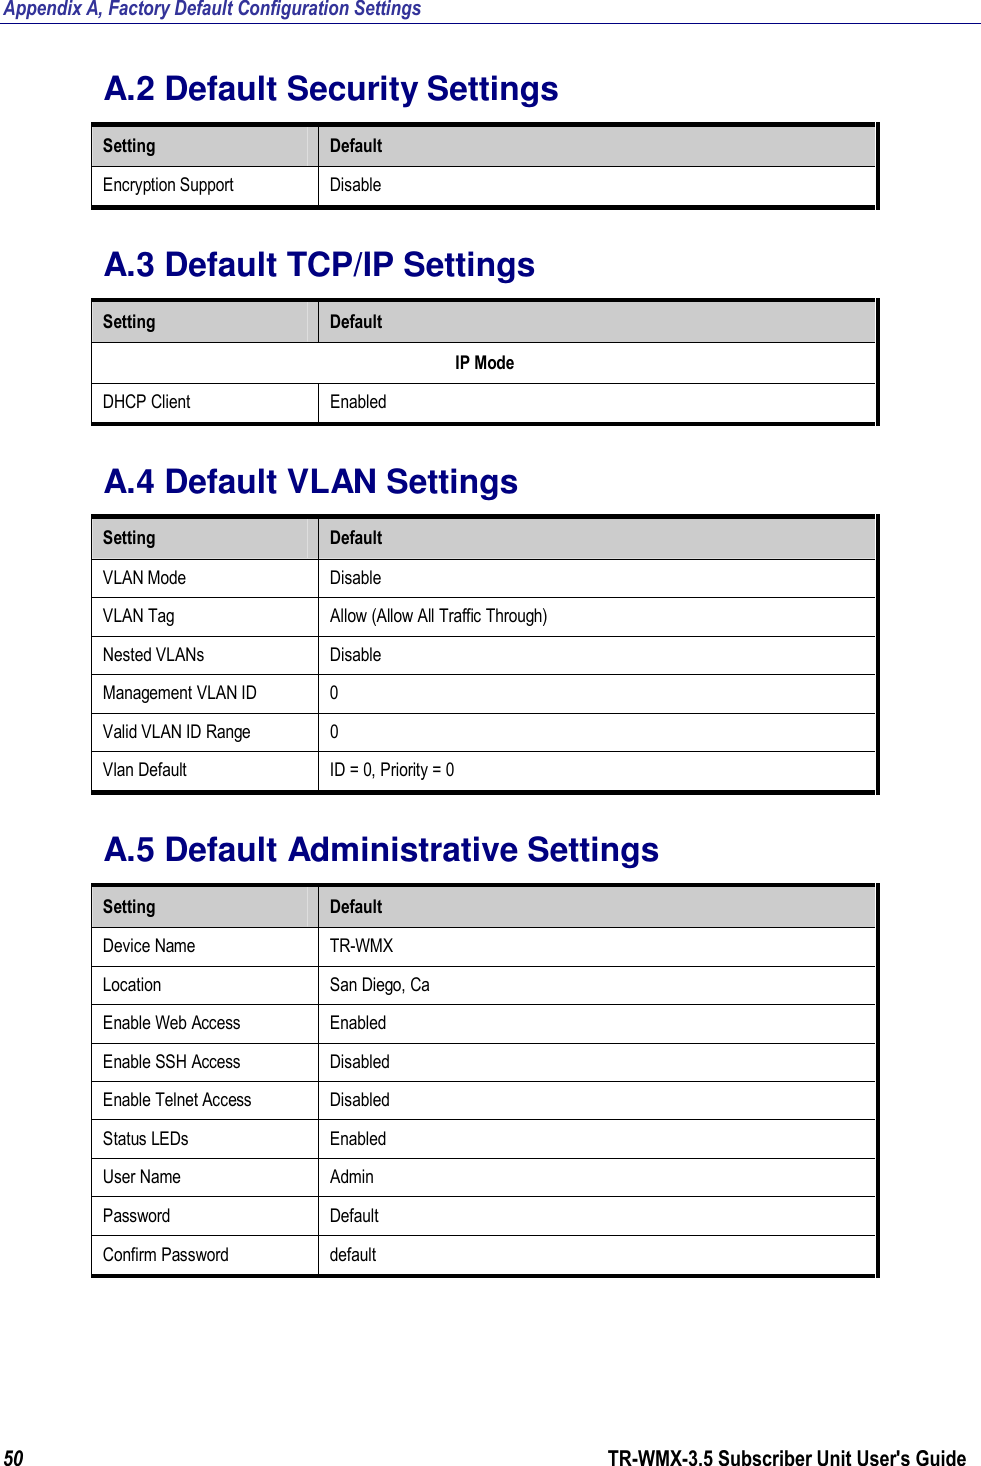 Appendix A, Factory Default Configuration Settings 50                      TR-WMX-3.5 Subscriber Unit User&apos;s Guide  A.2 Default Security Settings Setting  Default Encryption Support  Disable A.3 Default TCP/IP Settings Setting  Default IP Mode DHCP Client  Enabled A.4 Default VLAN Settings Setting  Default VLAN Mode  Disable VLAN Tag  Allow (Allow All Traffic Through) Nested VLANs  Disable Management VLAN ID  0 Valid VLAN ID Range  0 Vlan Default  ID = 0, Priority = 0 A.5 Default Administrative Settings Setting  Default Device Name  TR-WMX Location  San Diego, Ca Enable Web Access  Enabled Enable SSH Access  Disabled Enable Telnet Access  Disabled Status LEDs  Enabled User Name  Admin Password  Default Confirm Password  default 